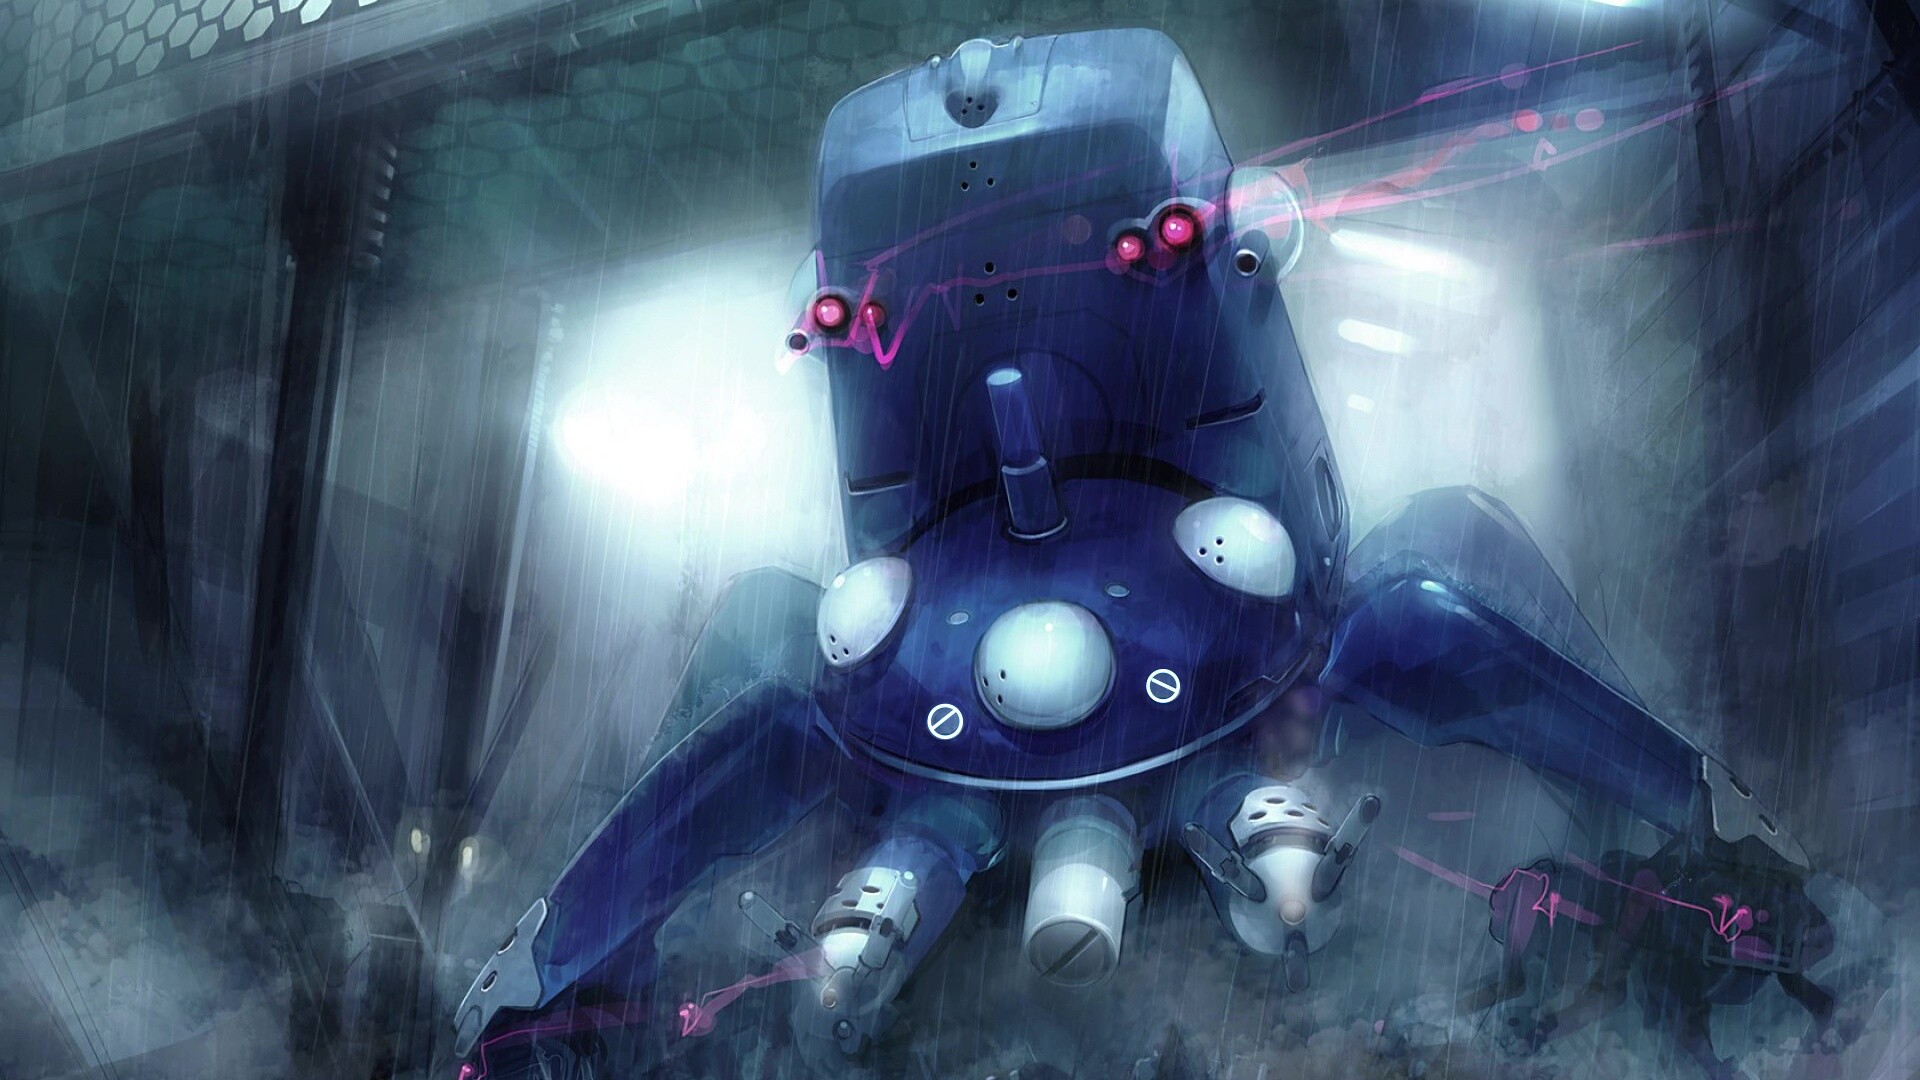 Ghost in the Shell (Anime): The Public Security Section 9 technical unit, Transportation robot, Japanese manga series. 1920x1080 Full HD Background.